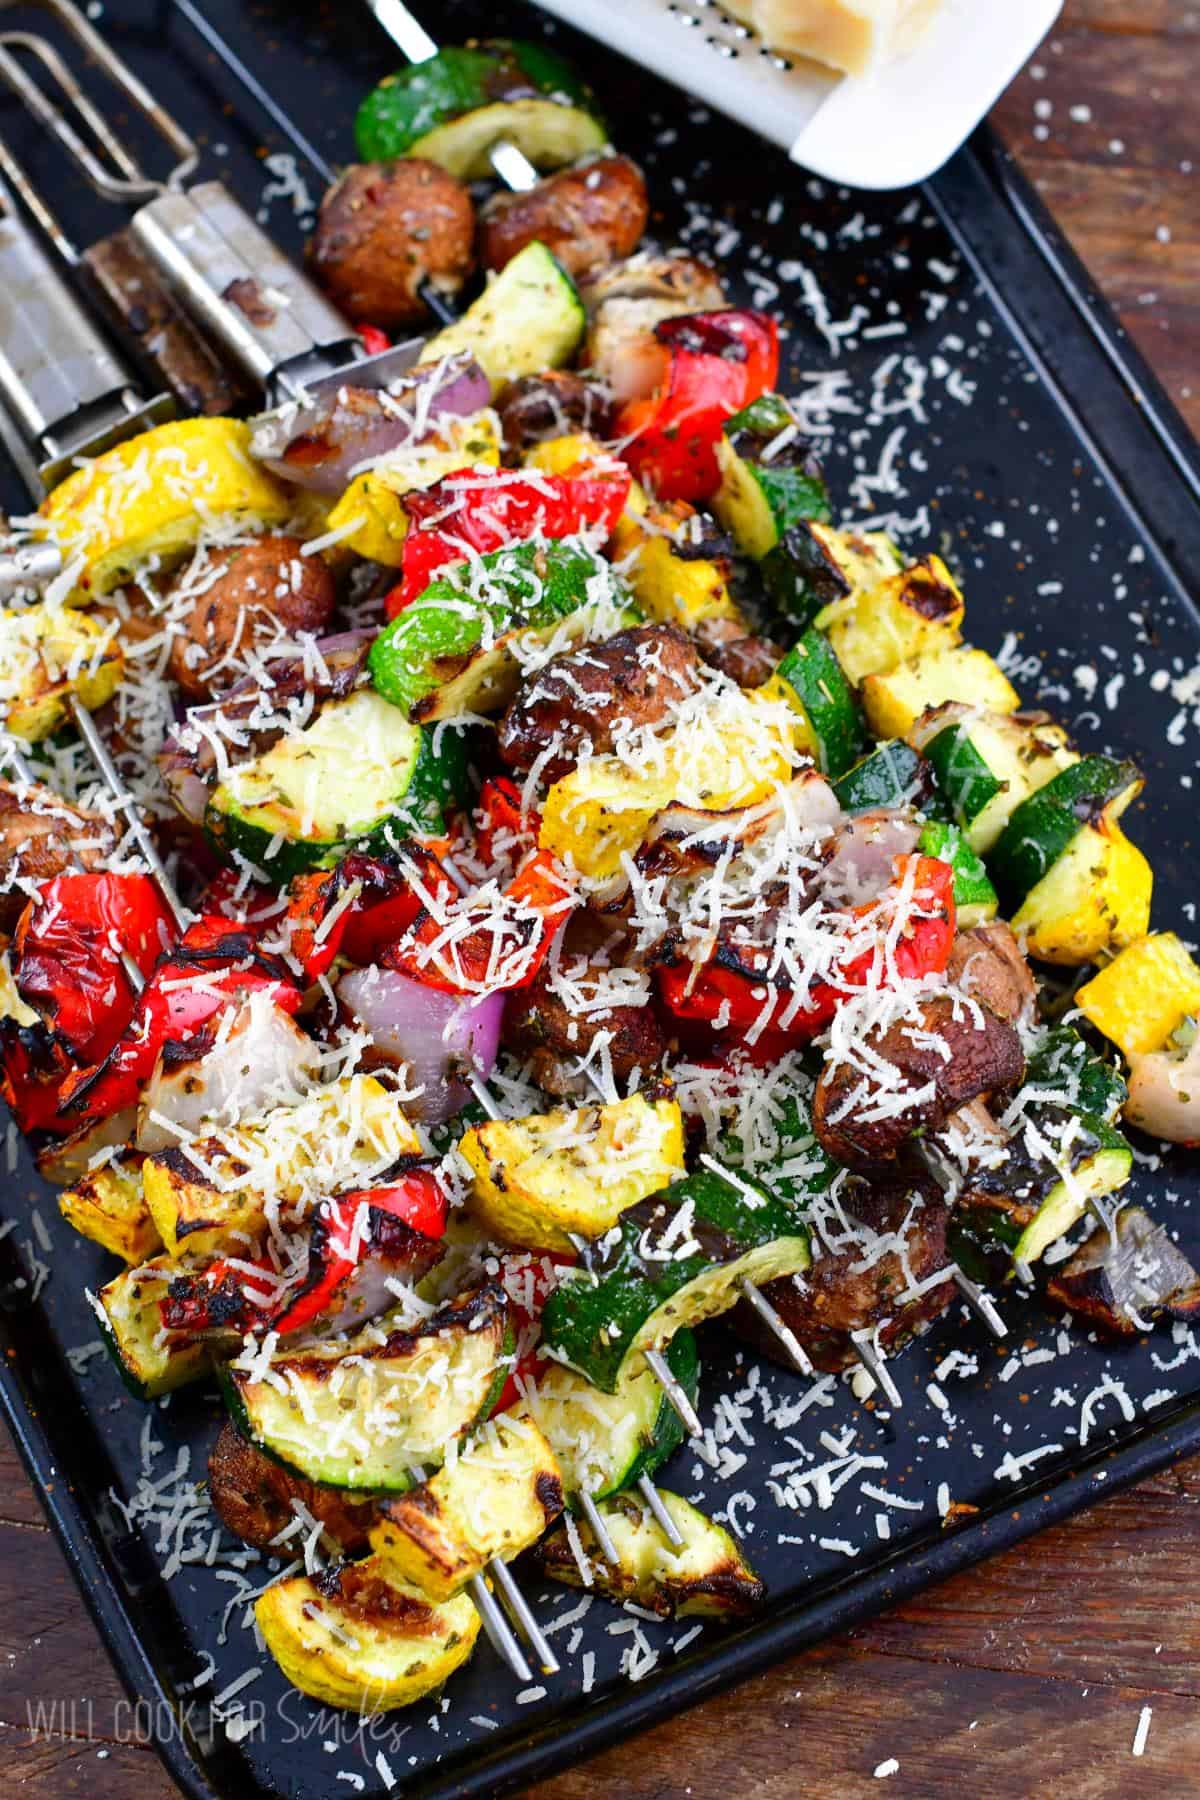 Cooked Italian vegetables on a baking sheet with parmesan cheese sprinkled on top.